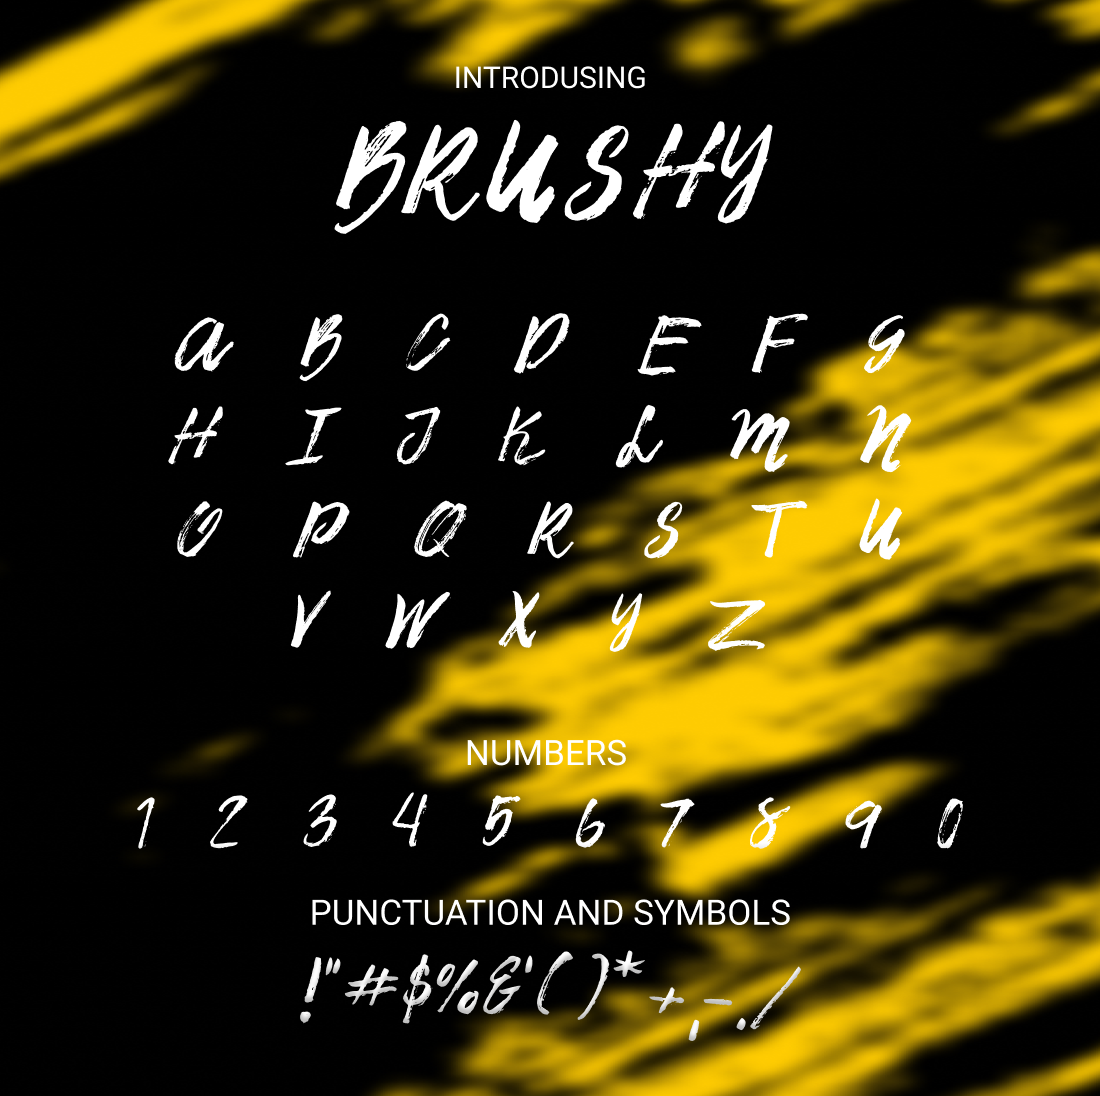 Images preview with brushy font.